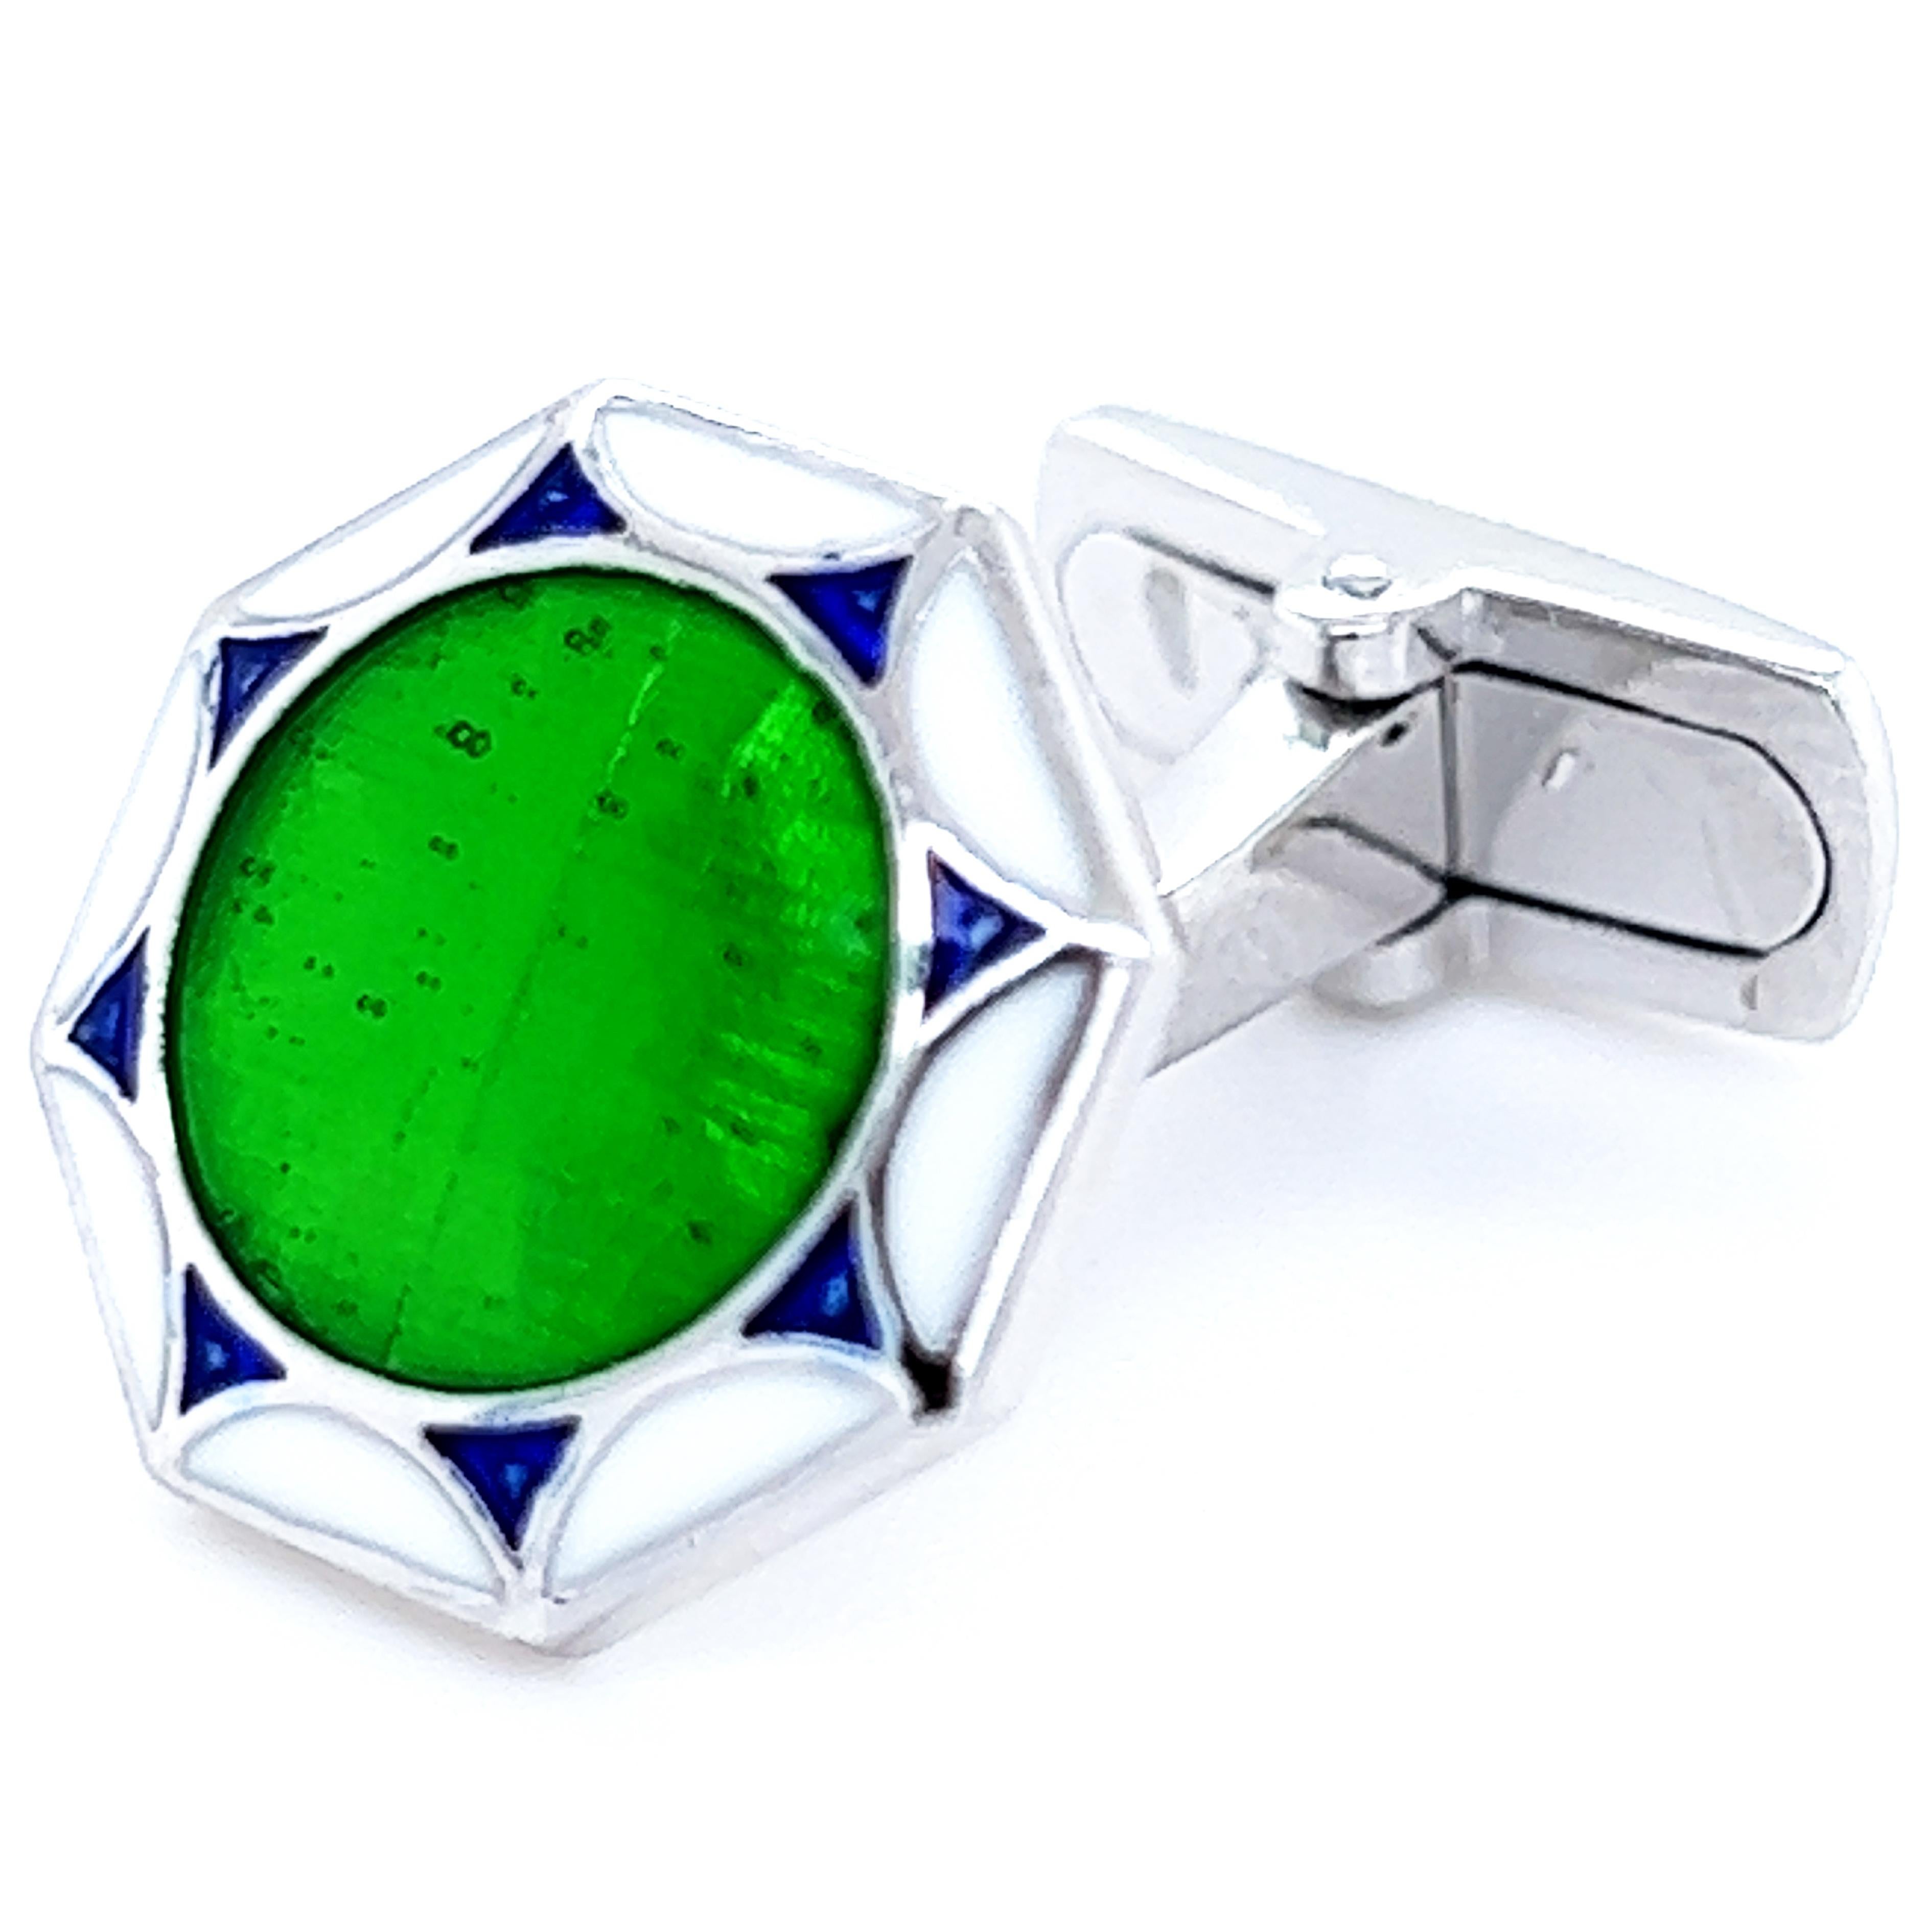 Chic yet Timeless Octagonal Vivid Transparent Green, White, Navy Blue Triangles Hand Enamelled Sterling Silver Cufflinks, T-bar back.
In our Smart Fitted  Suede Leather Box and Pouch.

Front Diameter 0.55 inches.